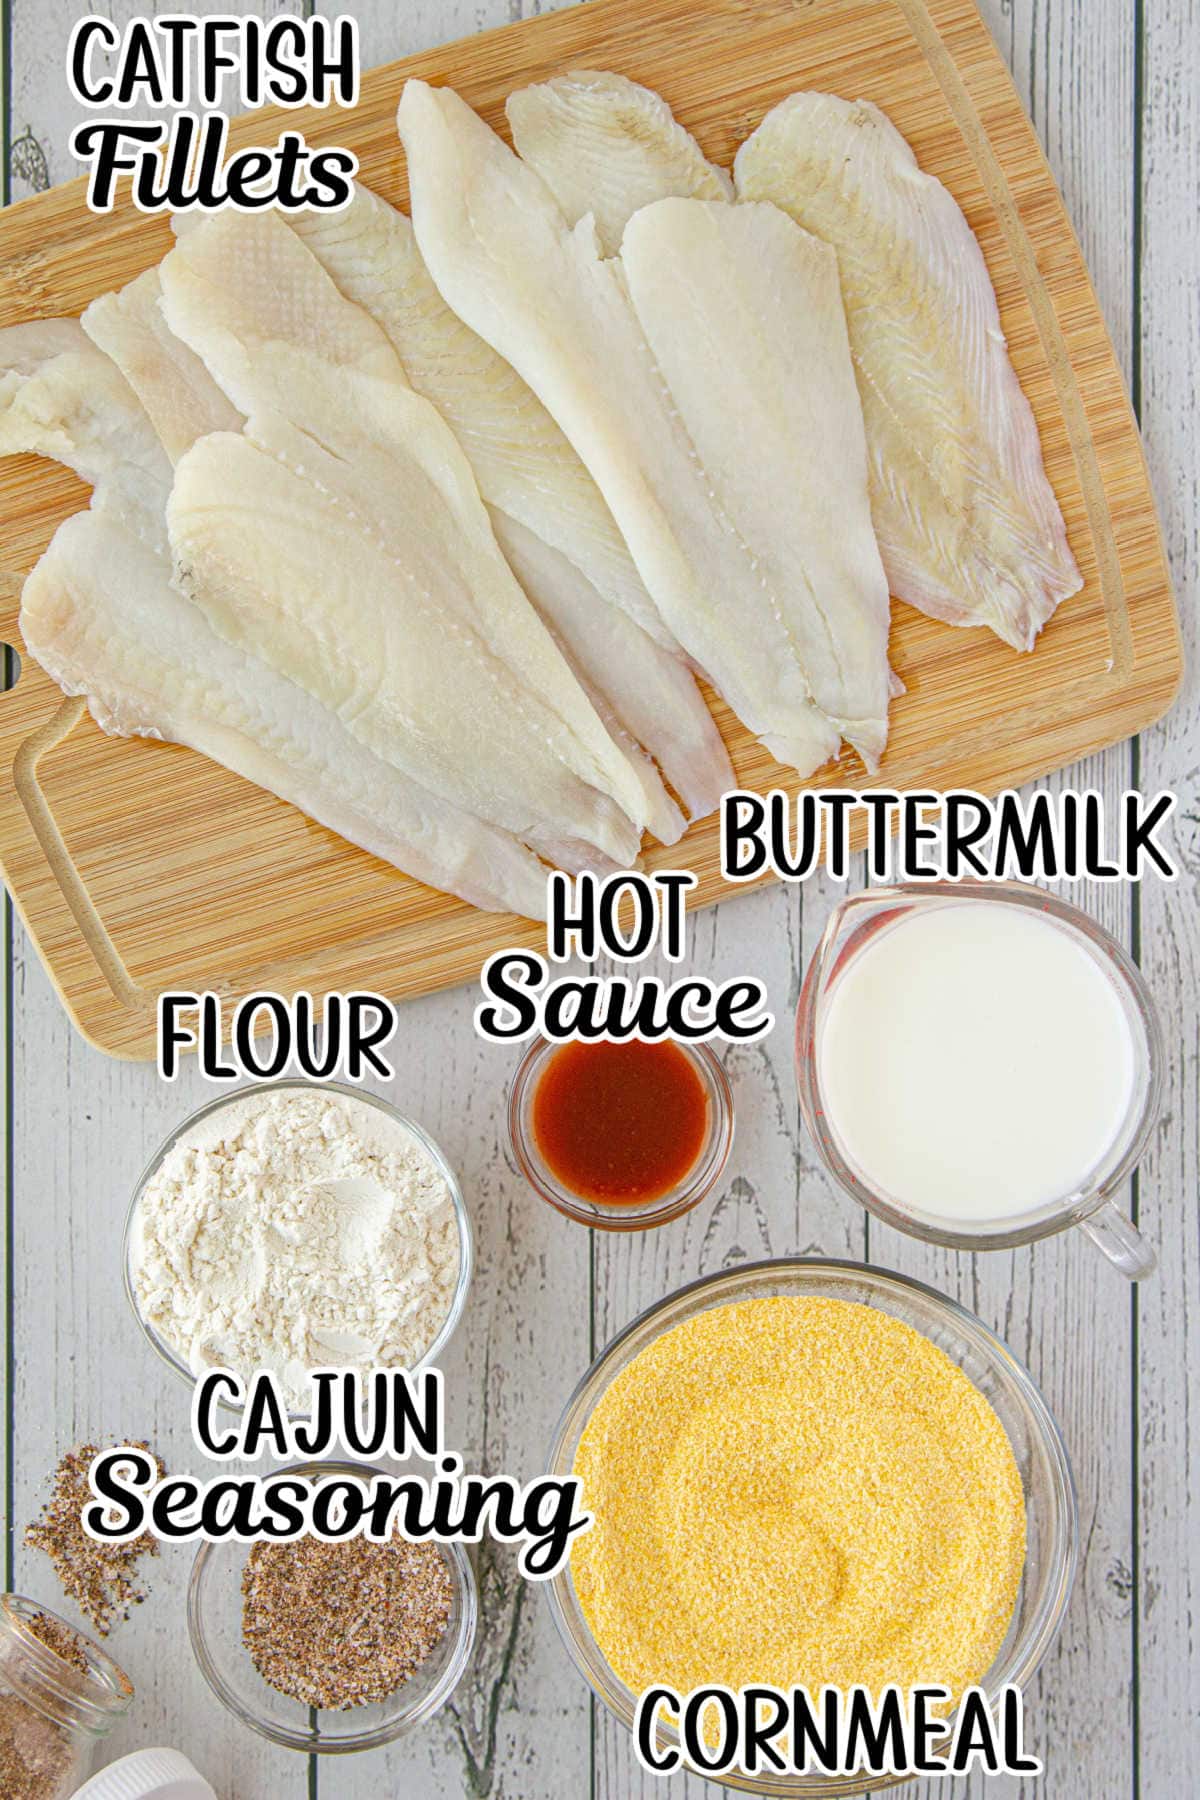 Labeled ingredients for fried catfish.